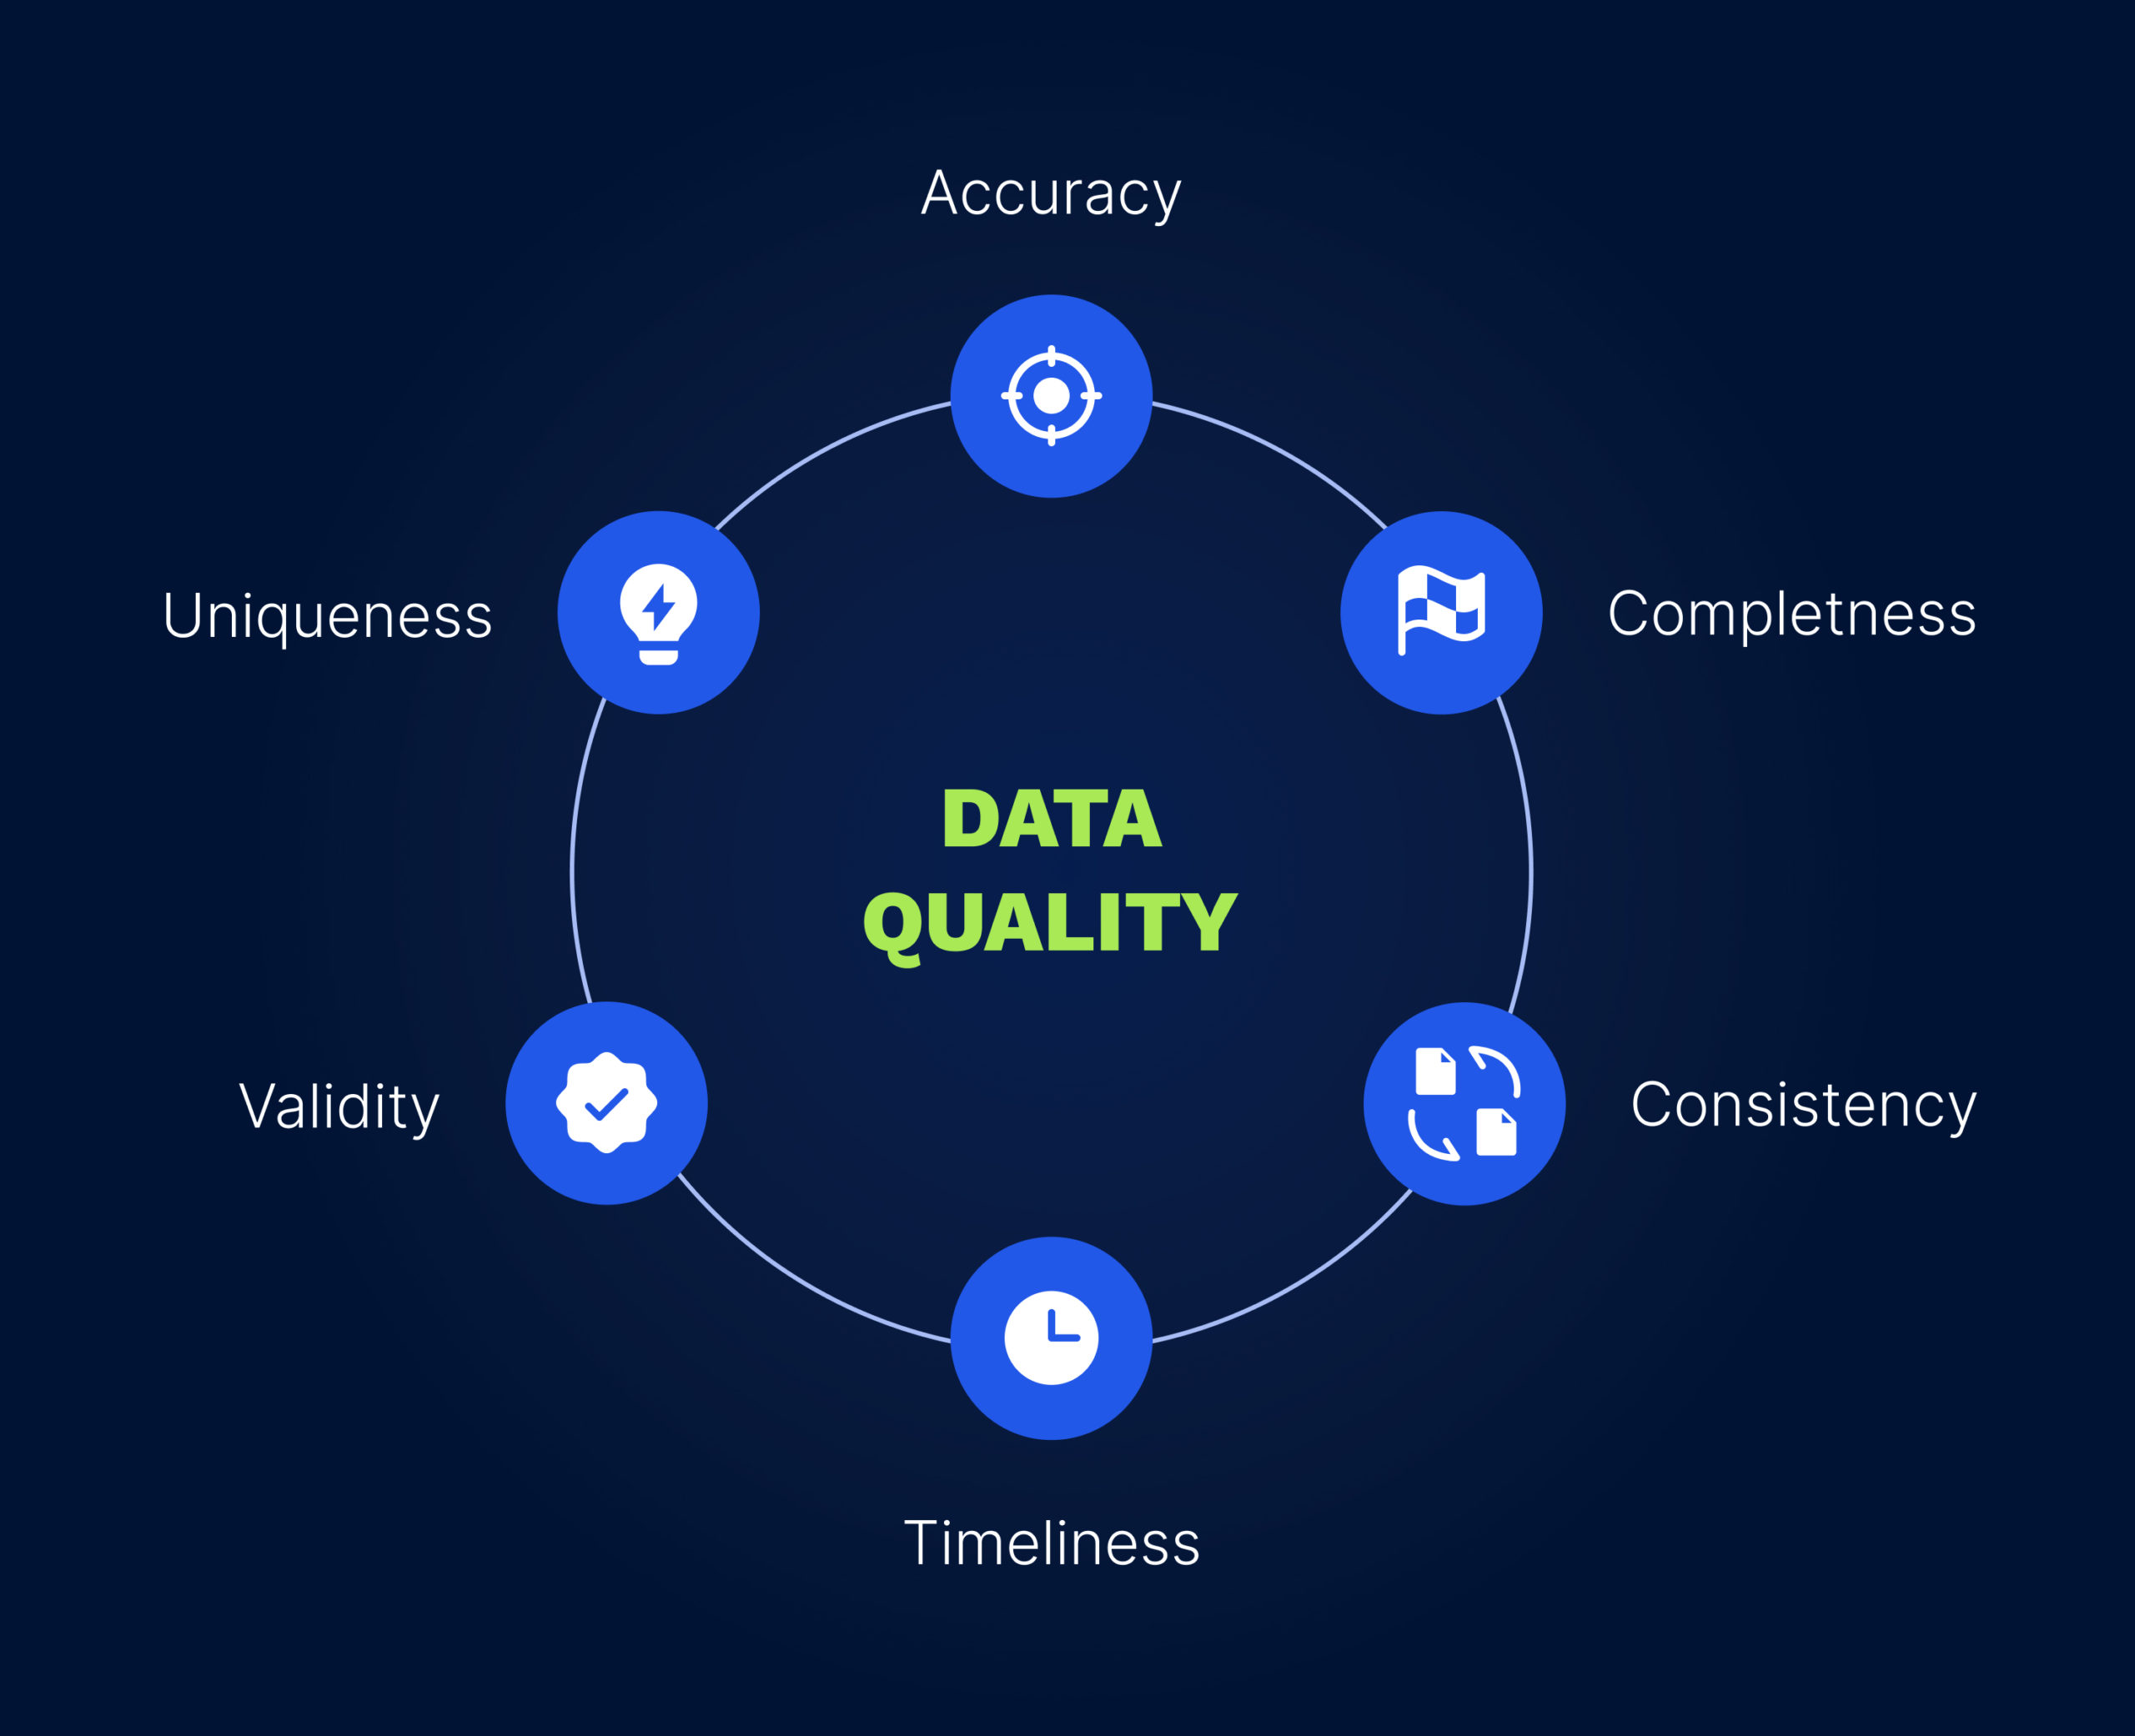 6 dimensions of data quality in healthcare